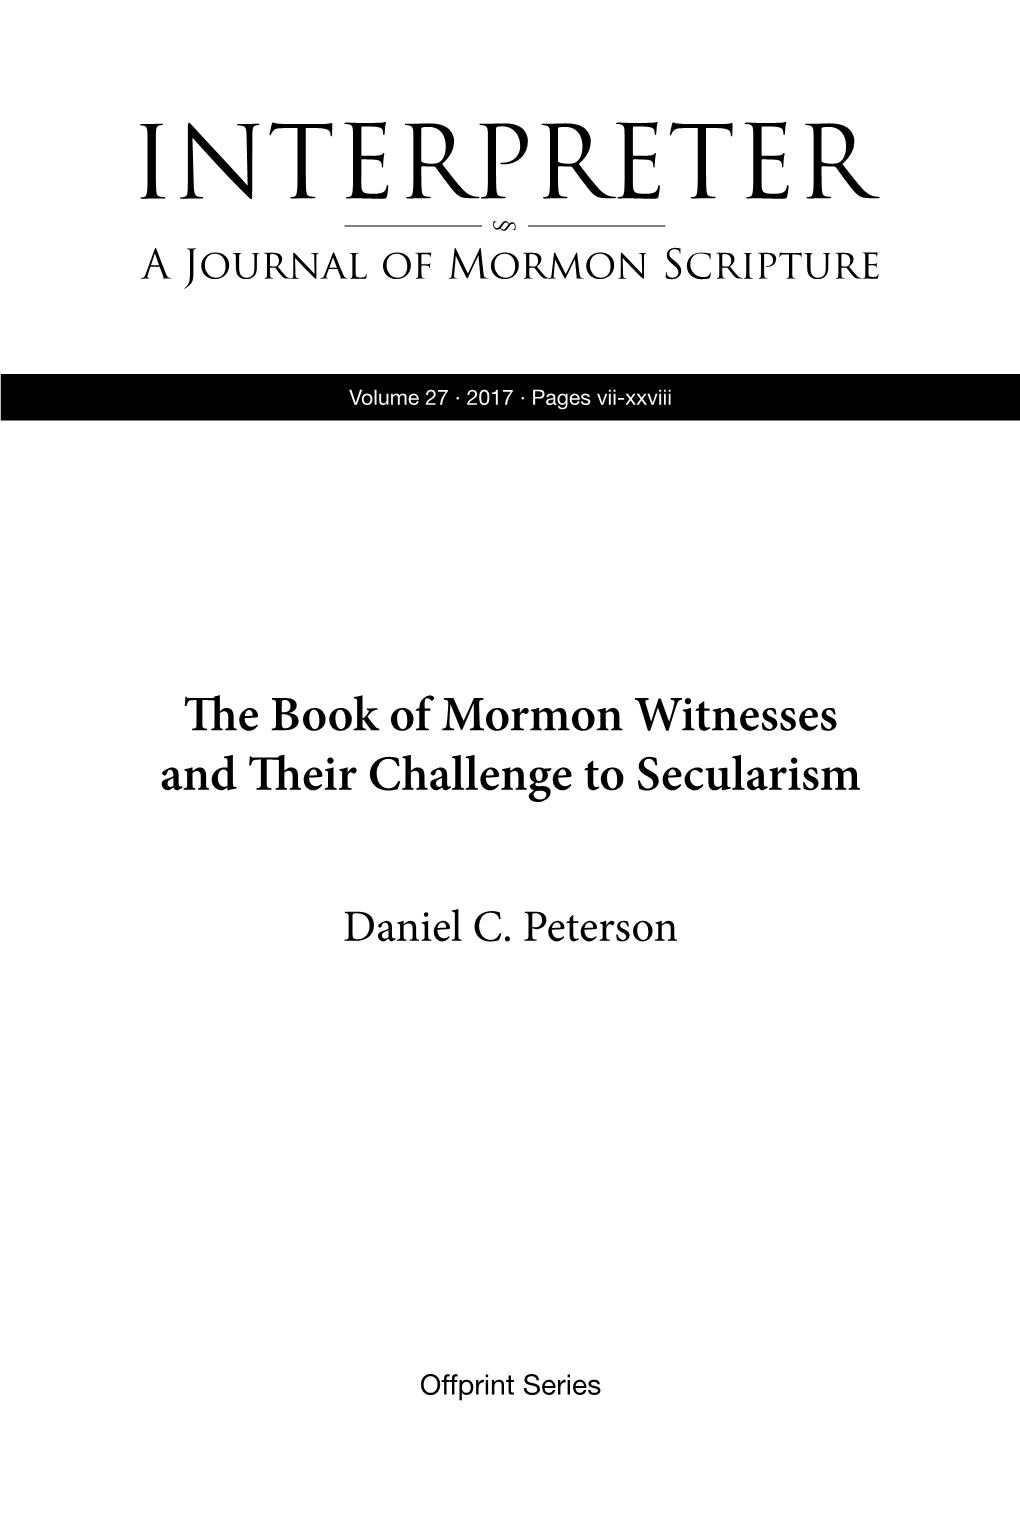 The Book of Mormon Witnesses and Their Challenge to Secularism